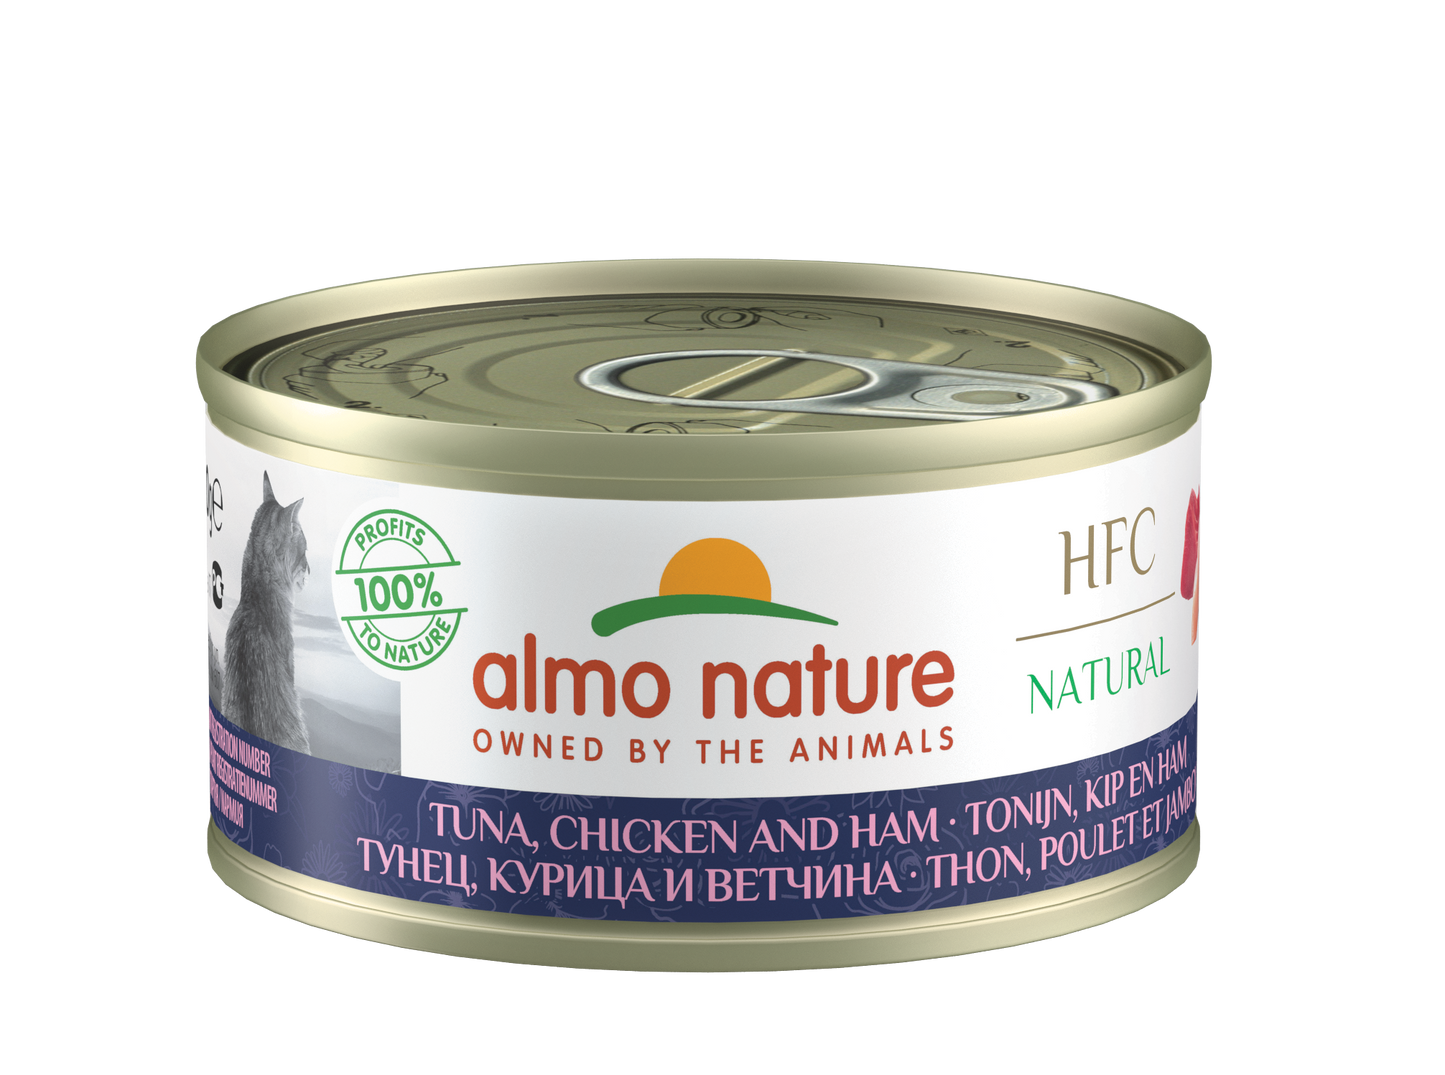 Almo Nature HFC Natural Canned Cat Food – Tuna,Chicken & Ham, 70g